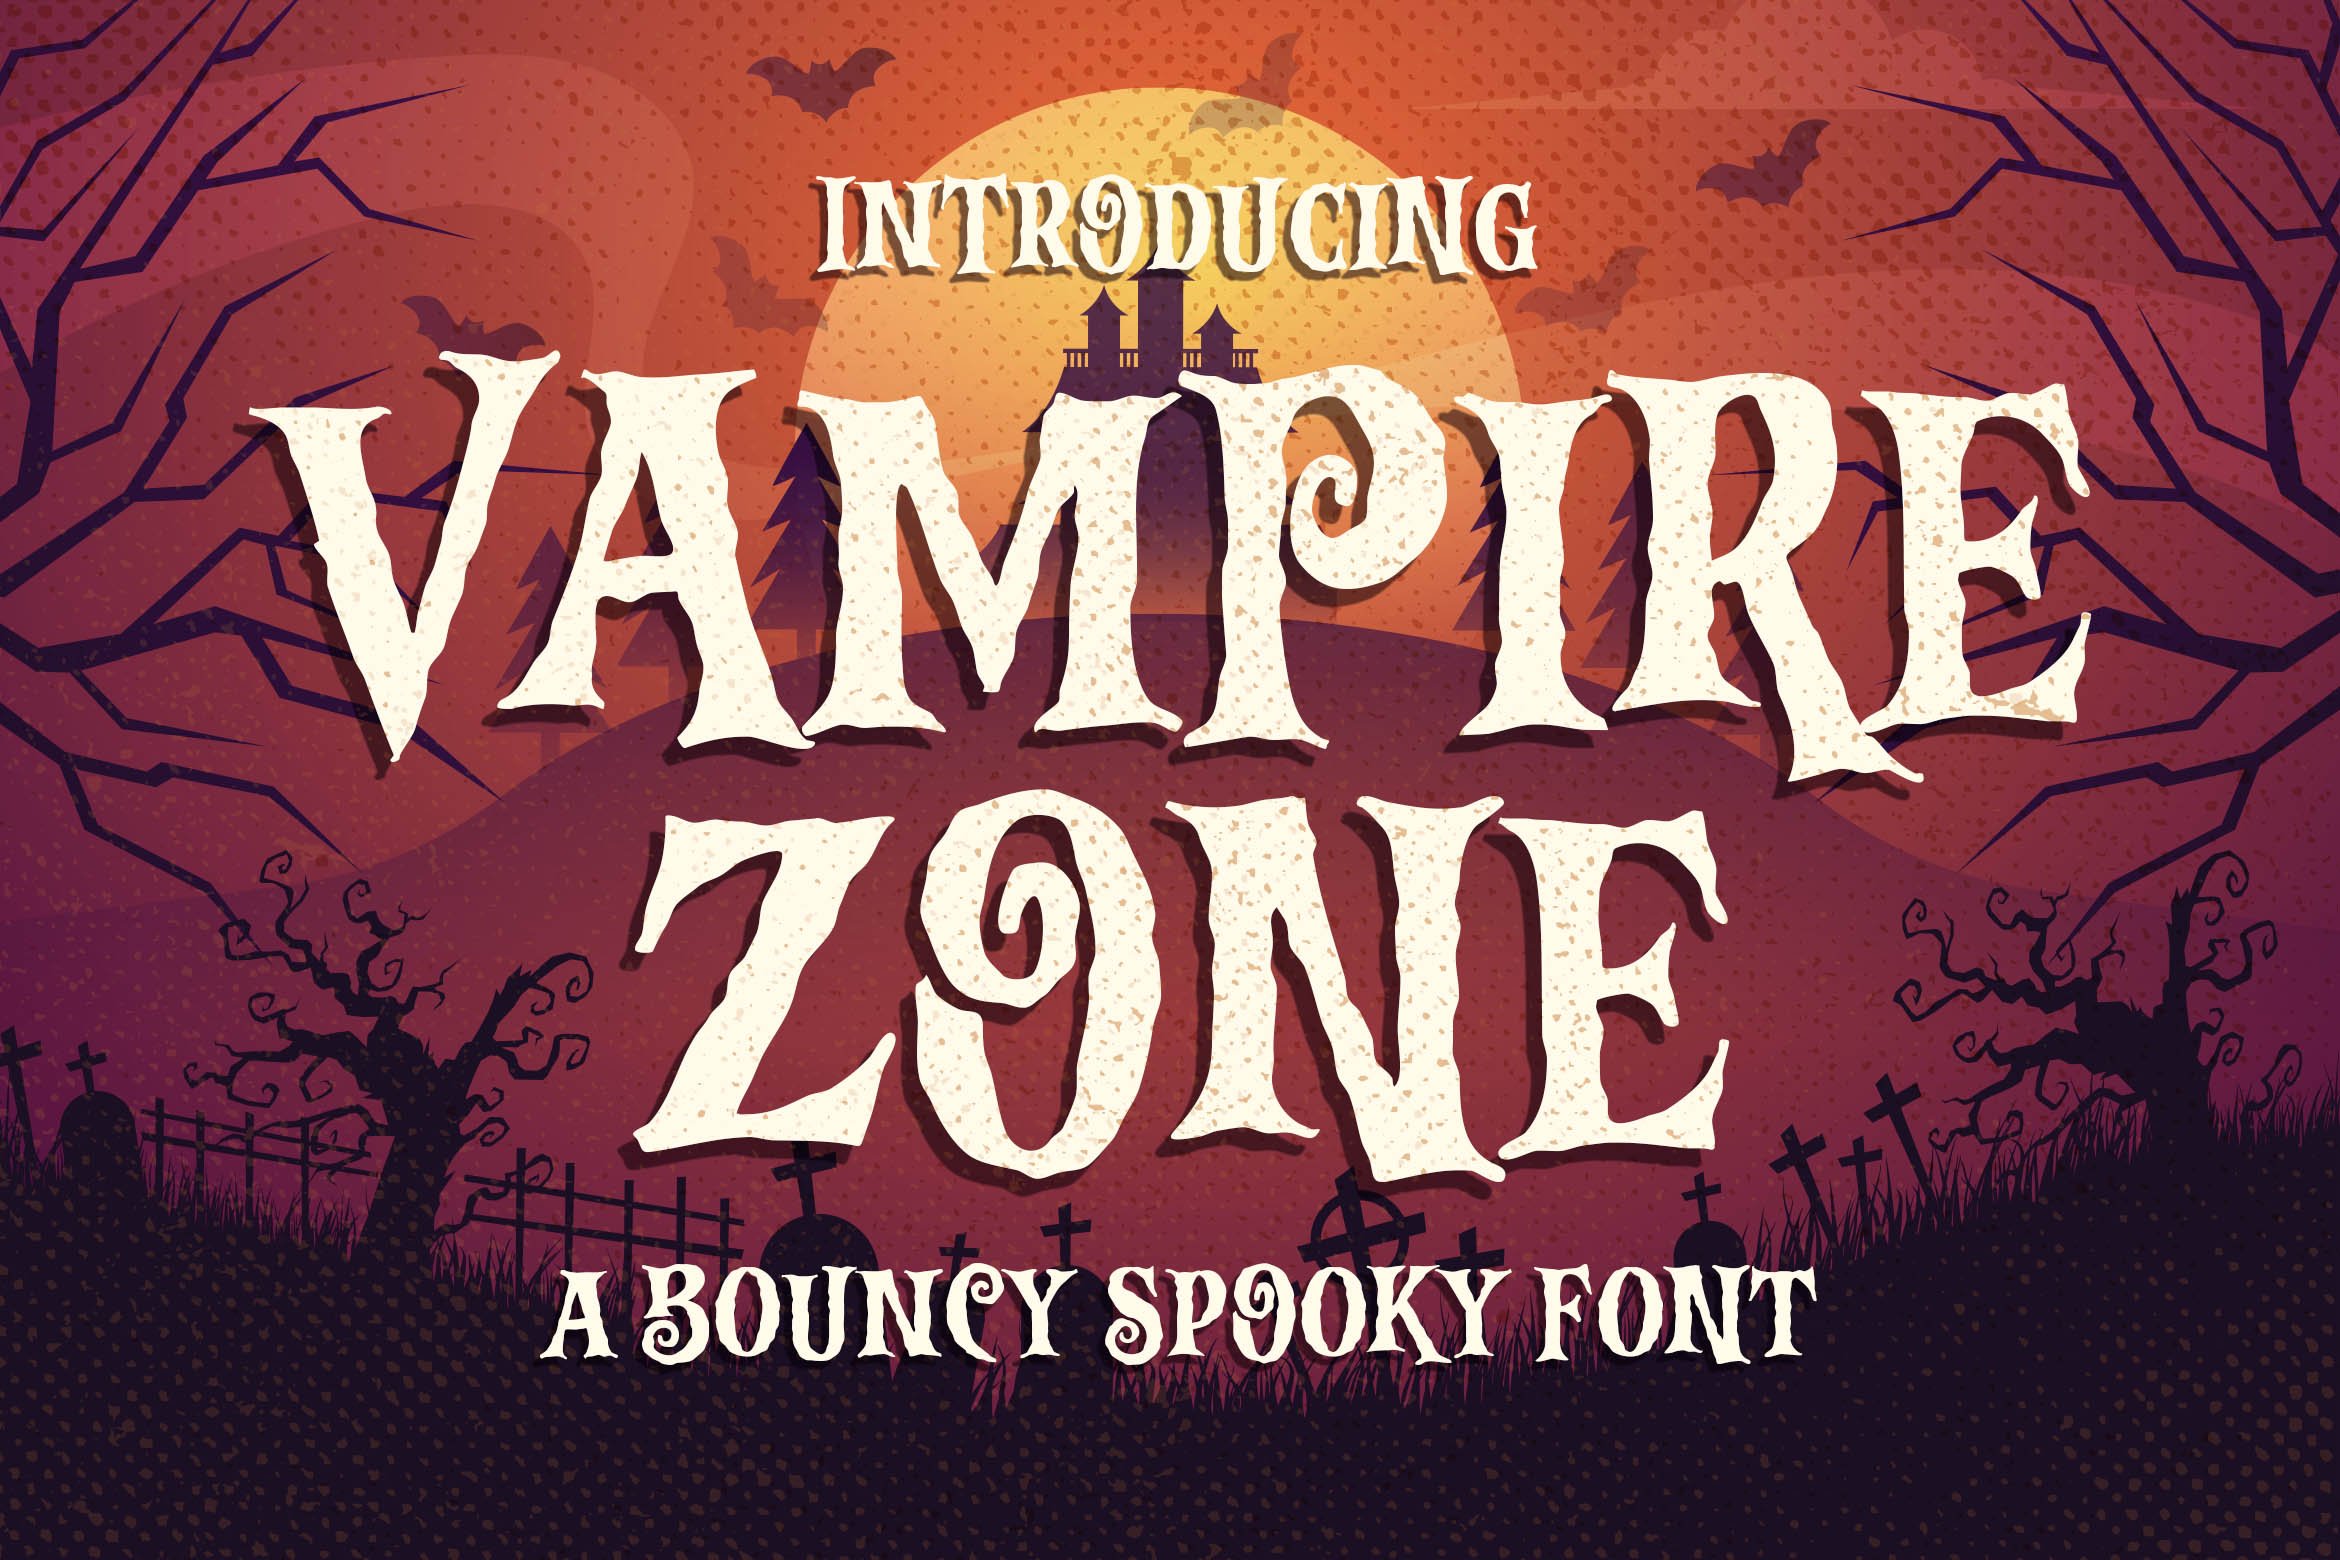 Vampire Zone - Bouncy Spooky Font cover image.